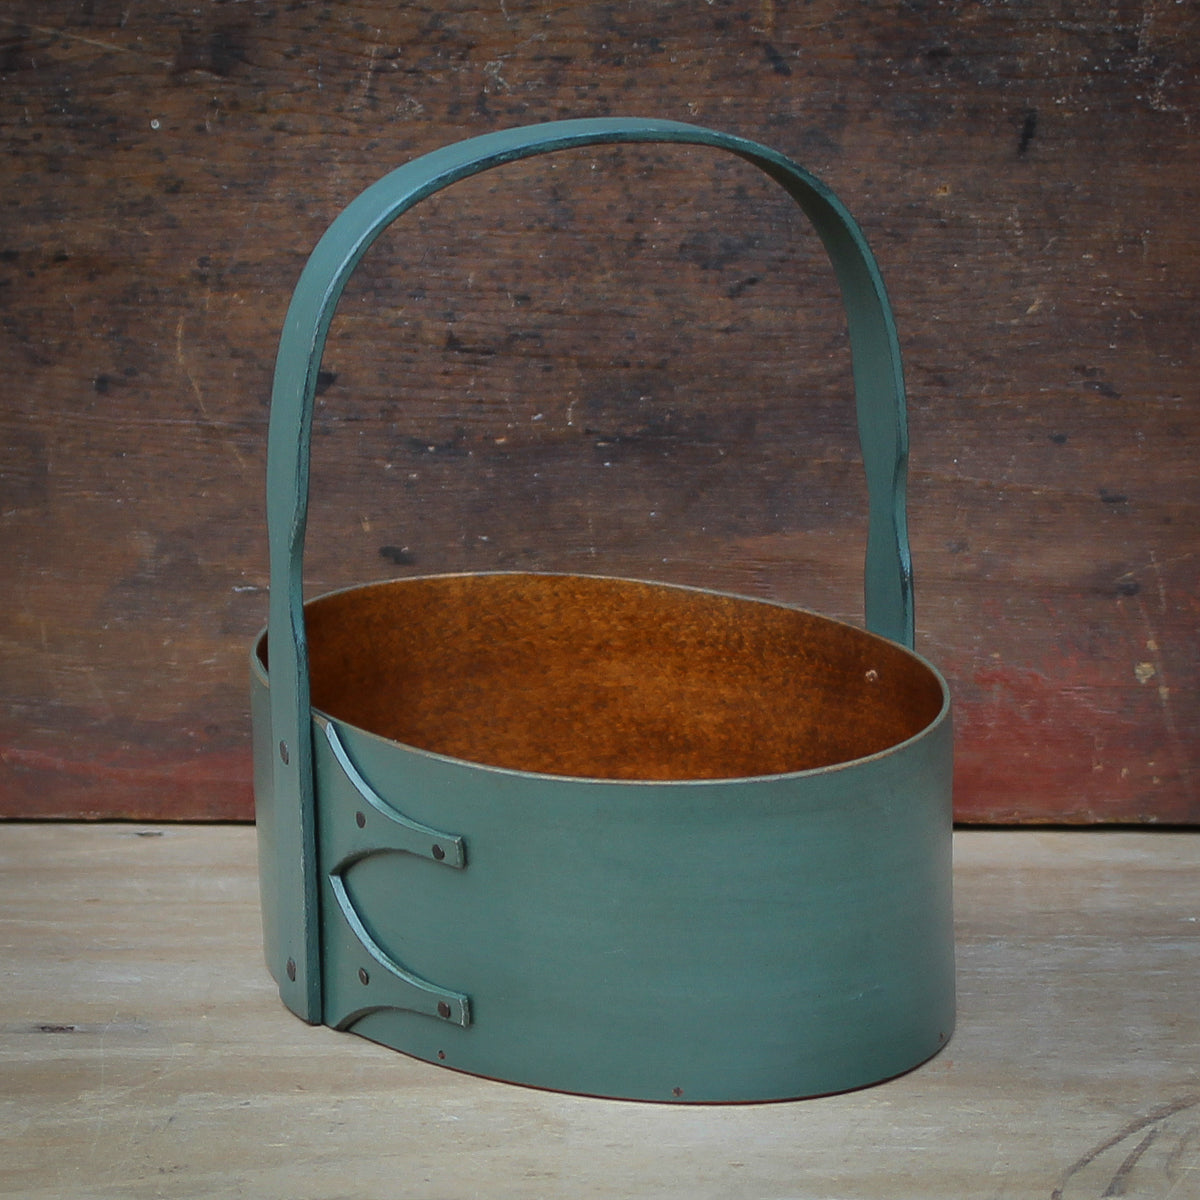 Shaker Carrier, Size #3, LeHays Shaker Boxes, Handcrafted in Maine.  Sea Green Milk Paint Finish, Side View